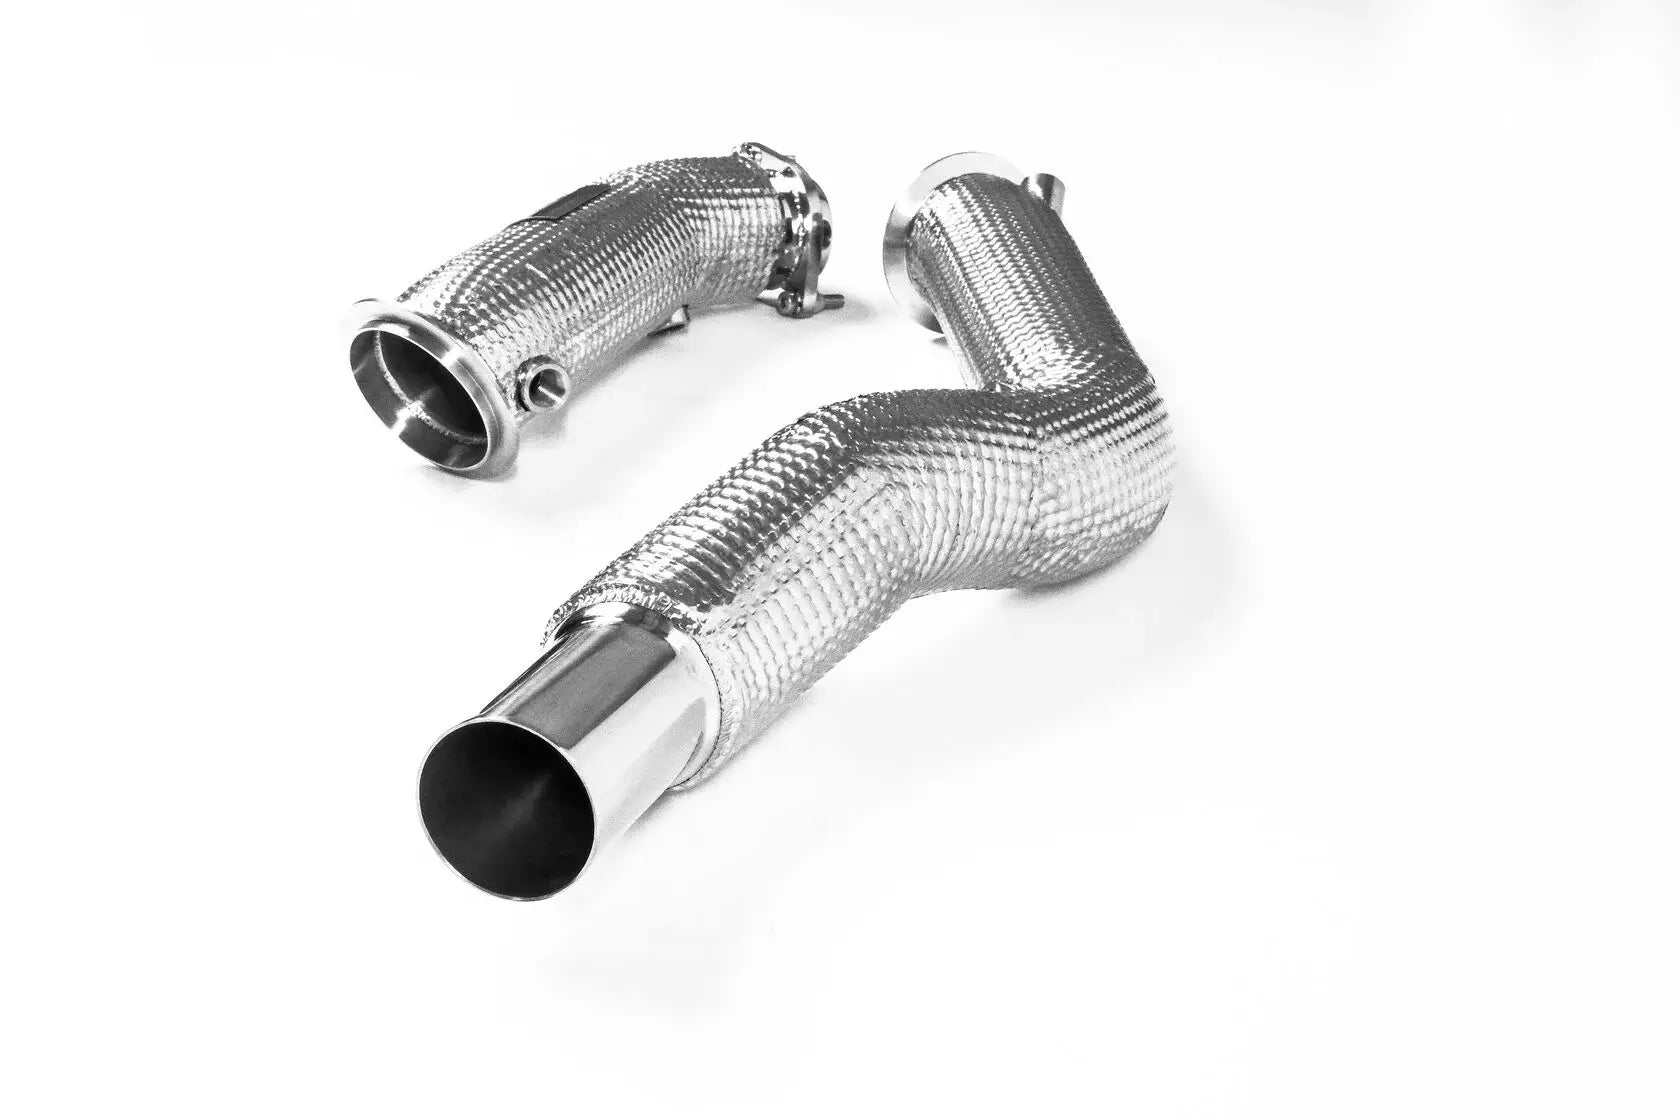 DEIKIN 10-BMW.M2.C.F87-DP Downpipe for BMW M2 Competition (F87) without HeatShield Photo-2 